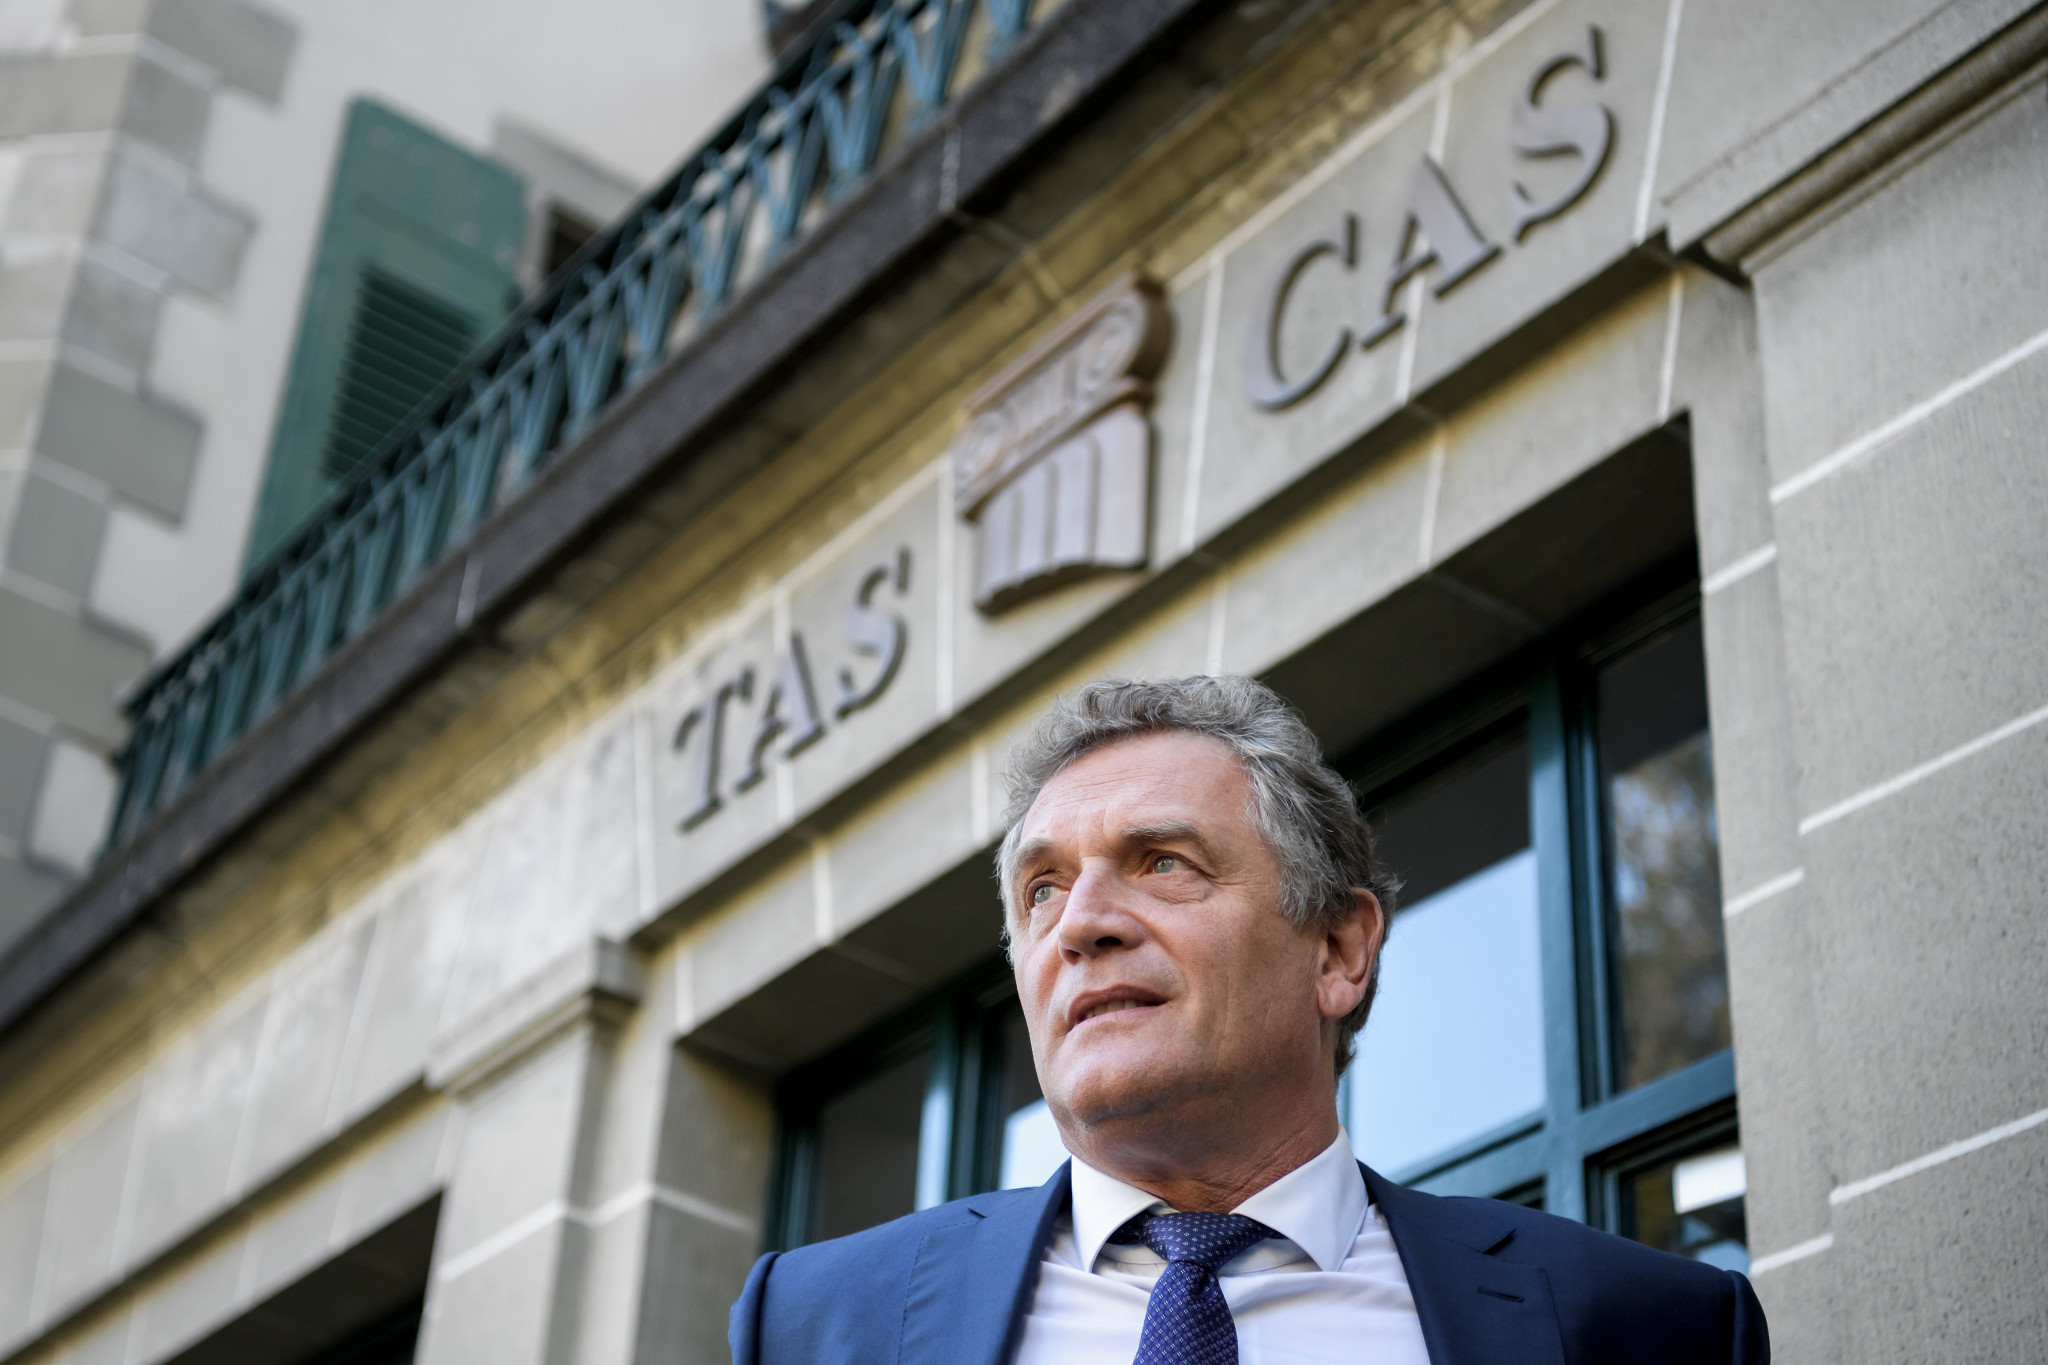 Jérôme Valcke failed with an appeal against his 10-year ban at the CAS earlier this year ©Getty Images